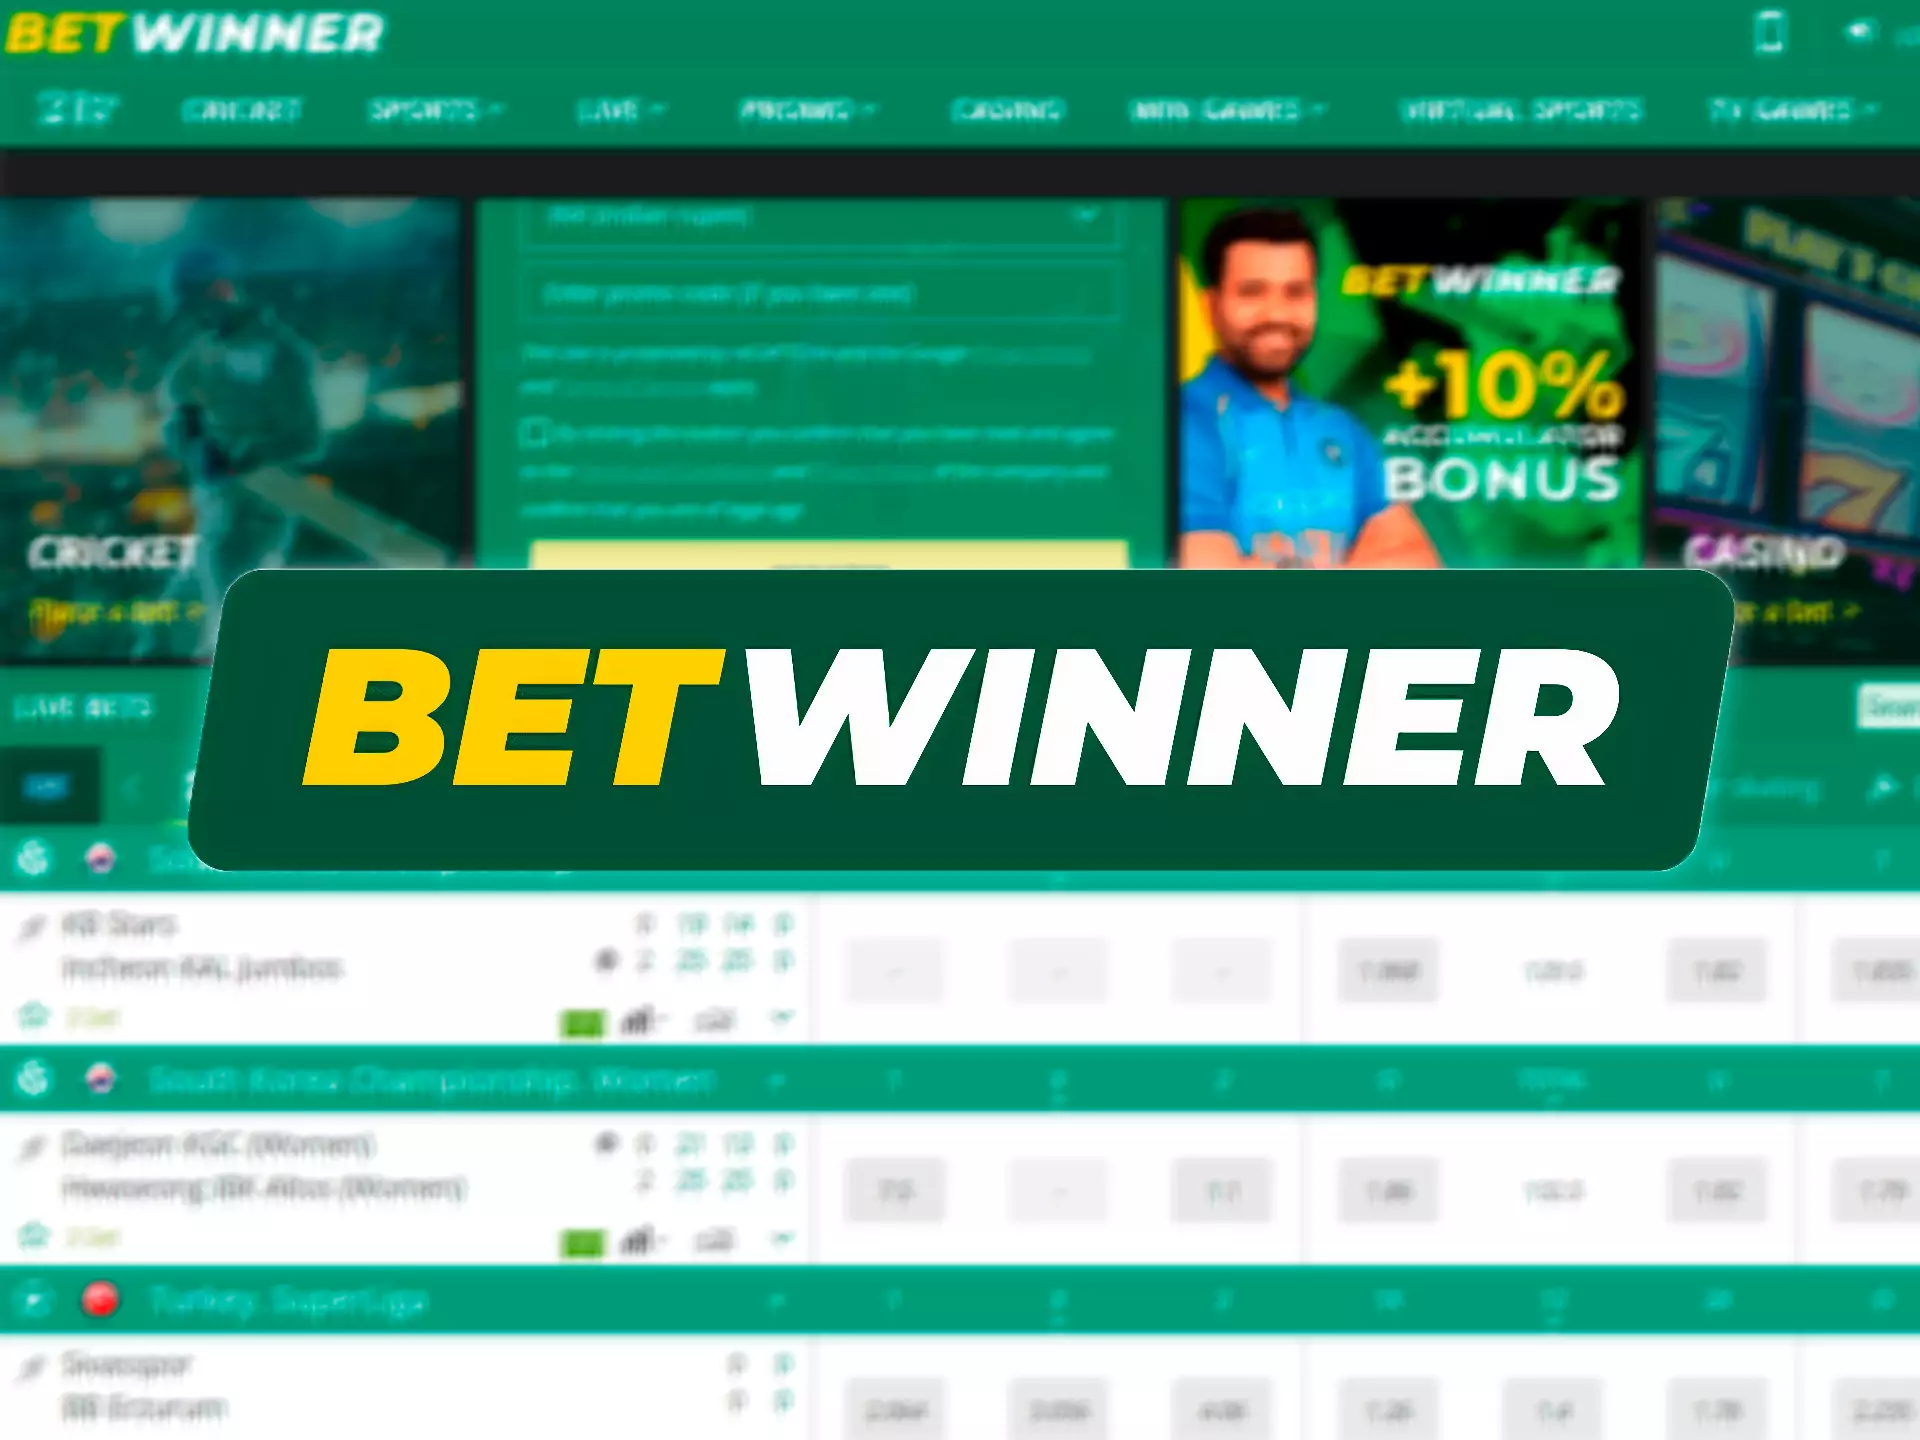 Choose Betwinner for cricket betting and place bets on IPL matches.